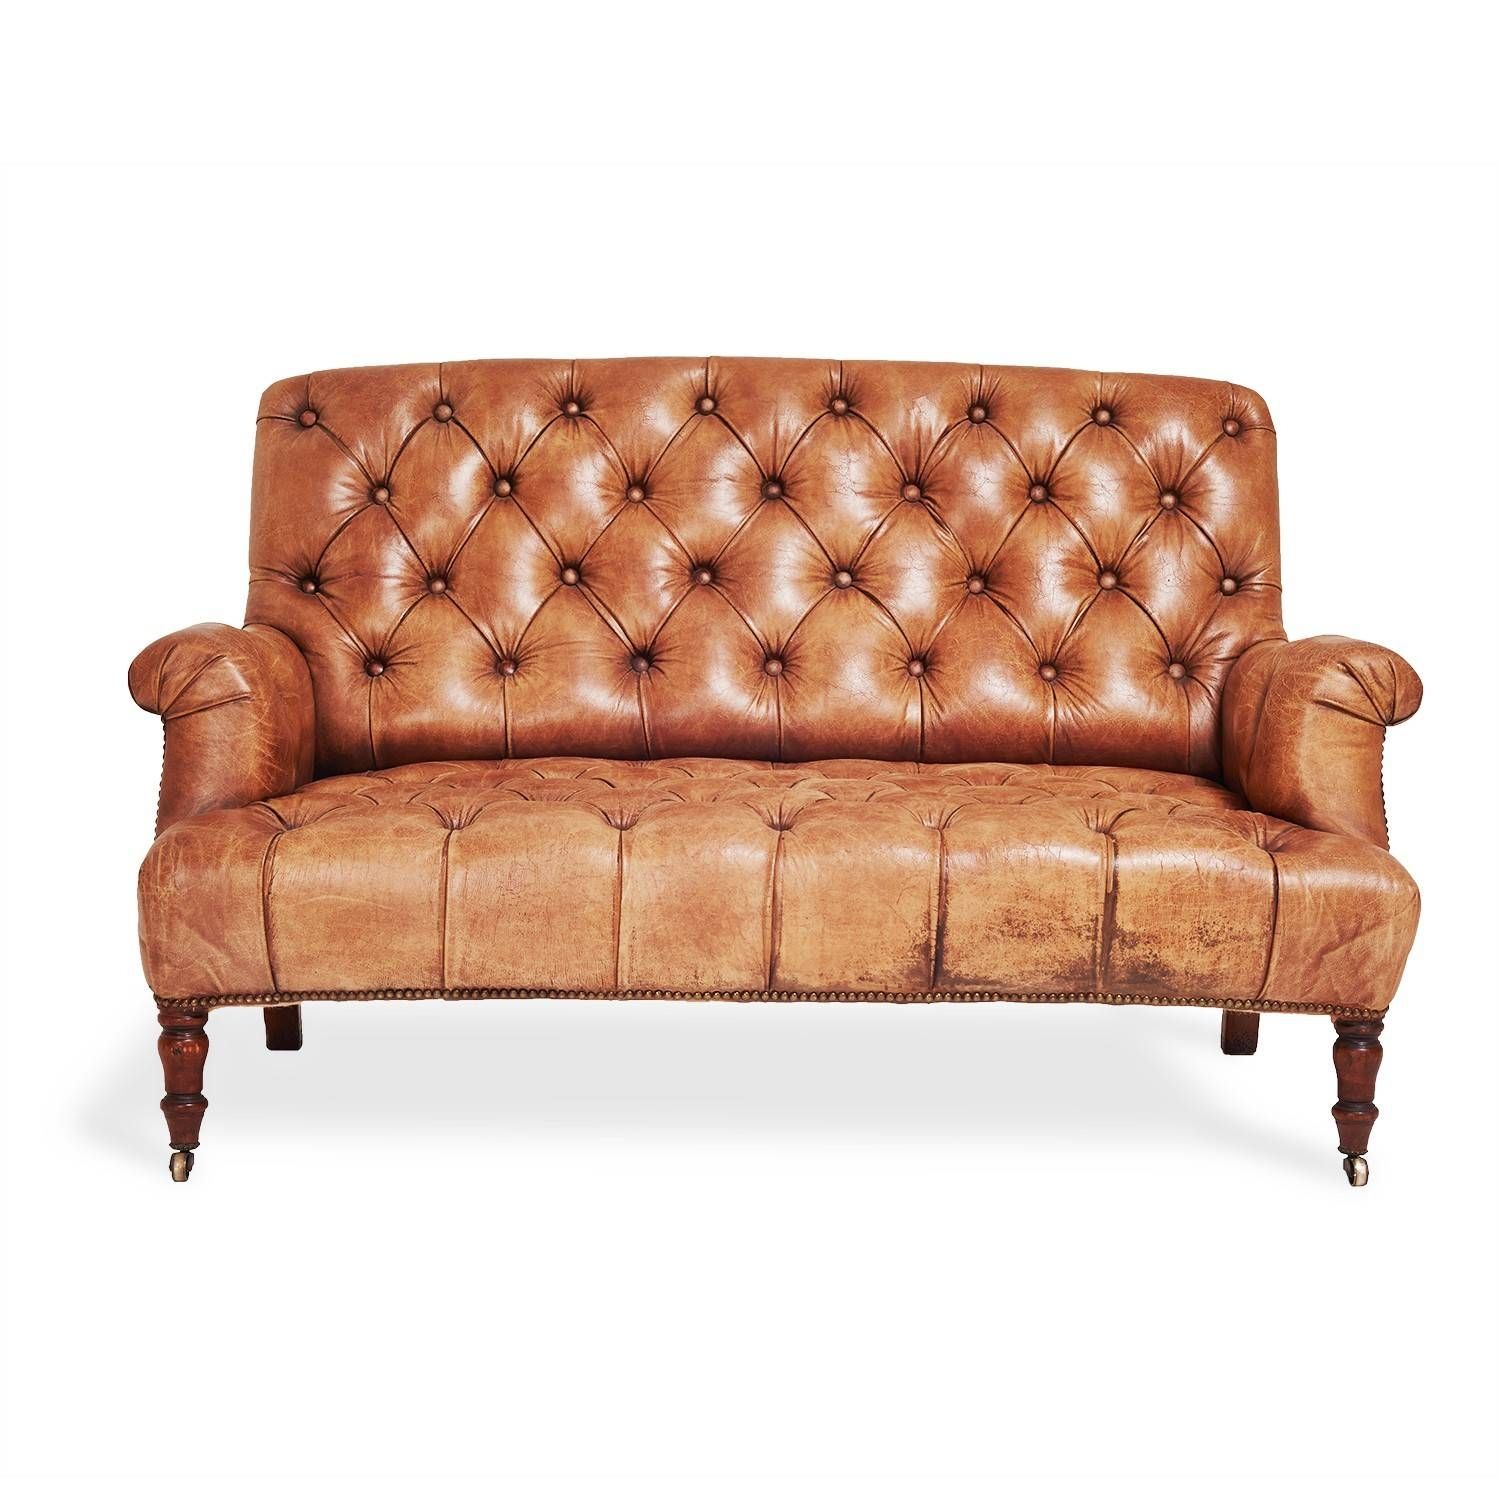 2 Seater Brown Leather Tufted Sofa With Wooden Legs For Small With Brown Leather Tufted Sofas (View 3 of 15)